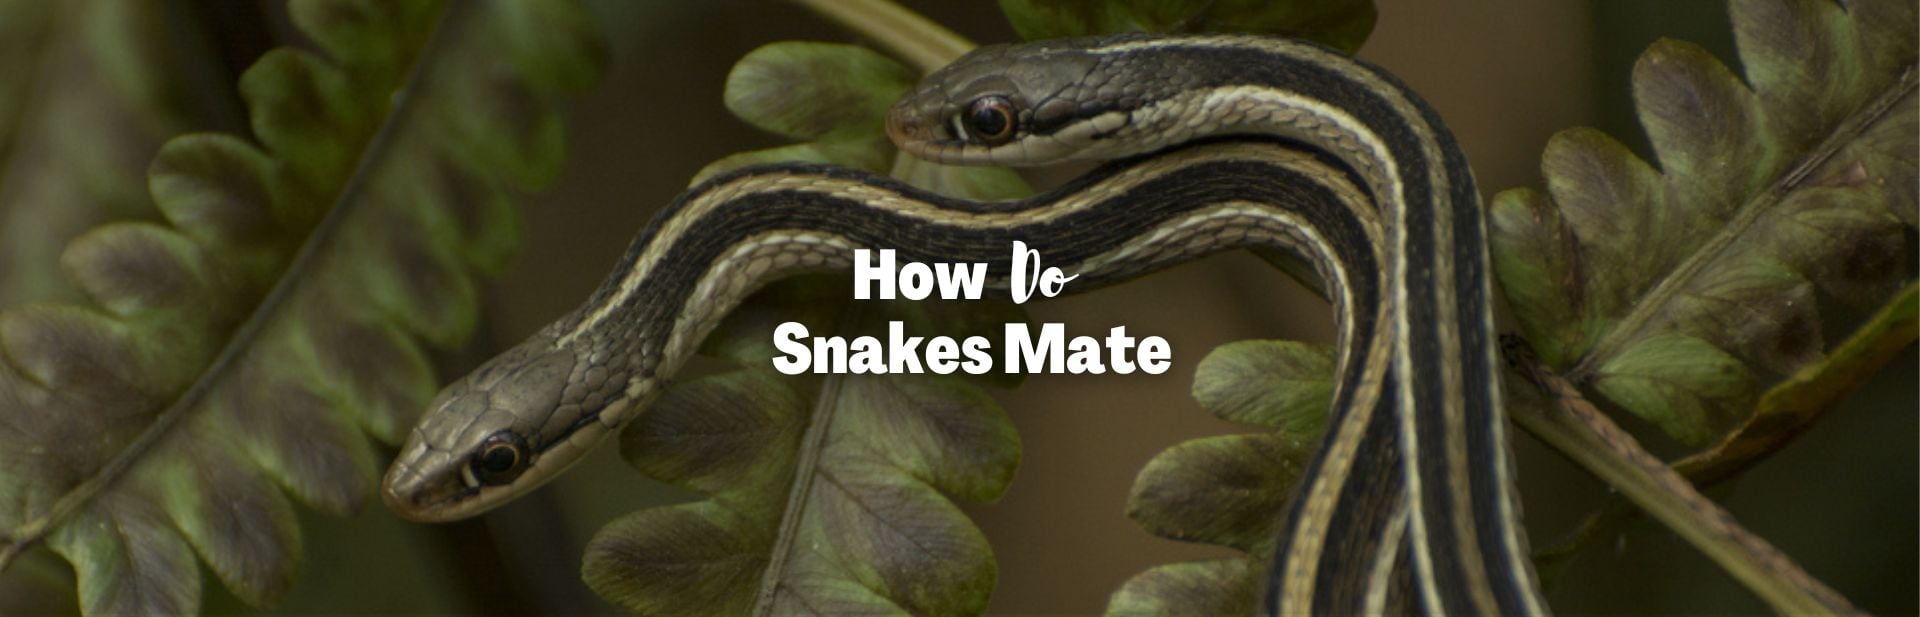 How Do Snakes Mate? The Weird And Cringey World Of Snake Reproduction